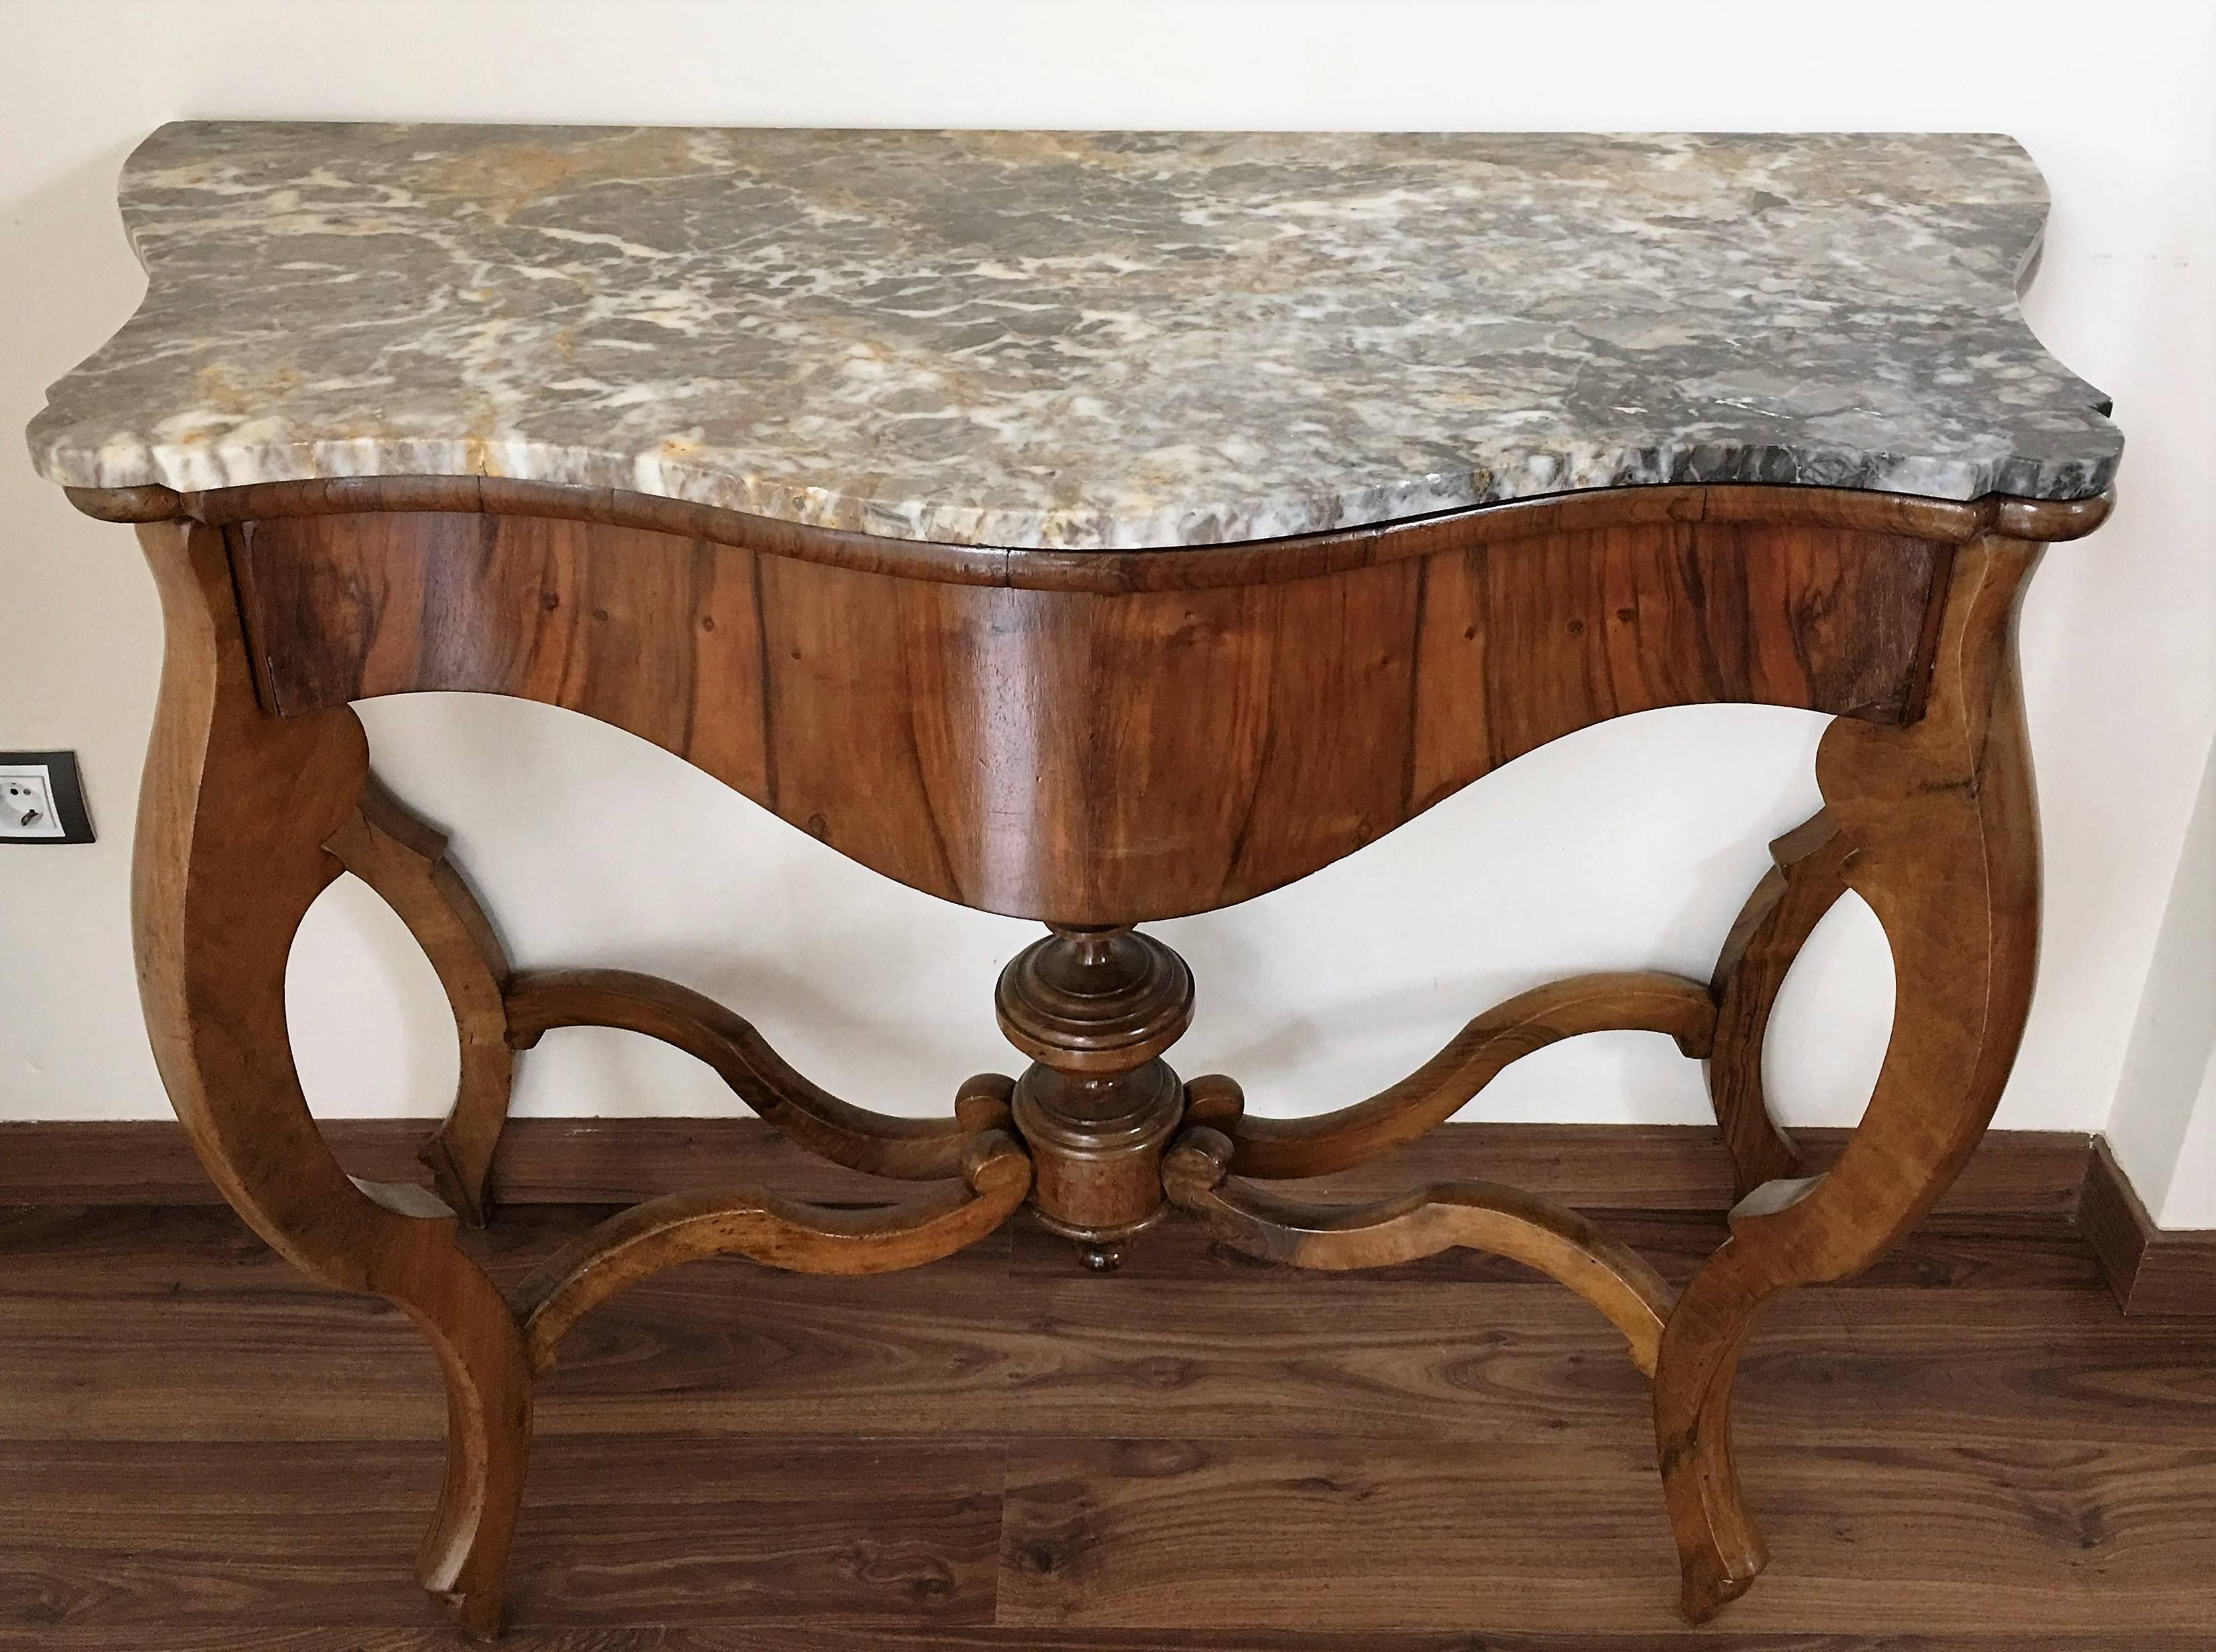 Victorian 19th Century Marble Top Walnut Console Table with drawer